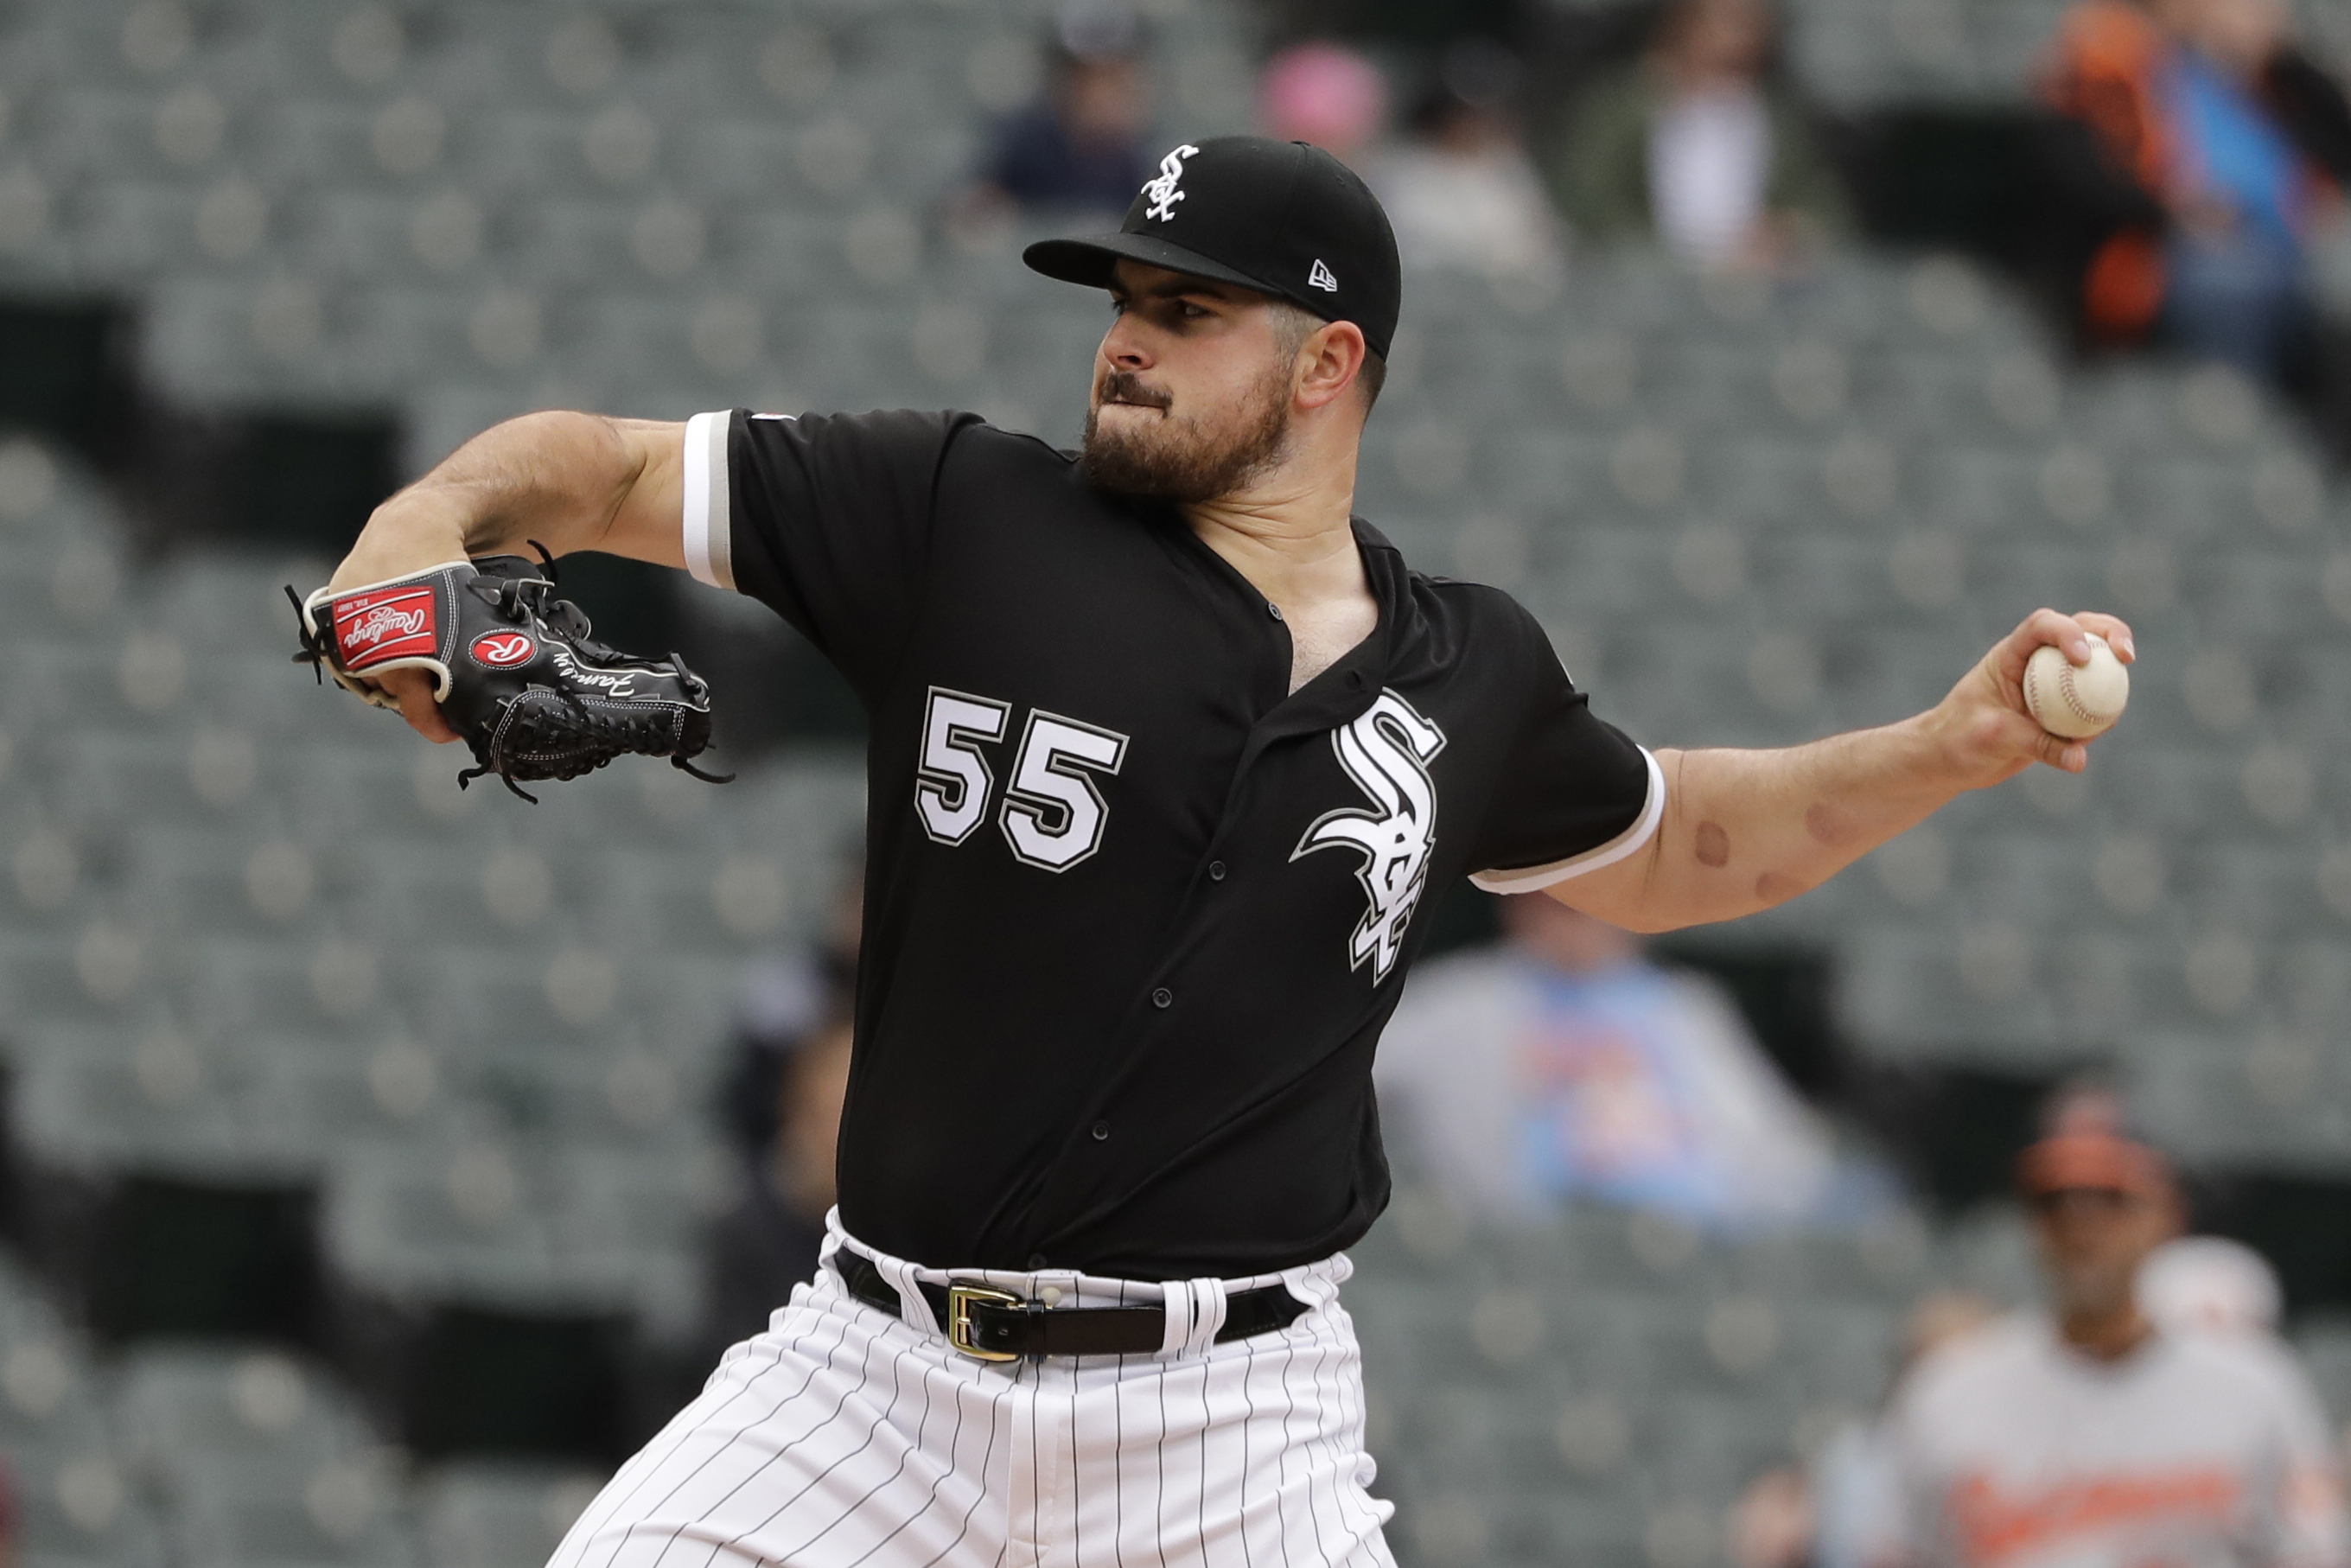 Can the White Sox Rely on Kopech and Rodon in 2020 After Tommy John  Surgery? - Diamond Digest